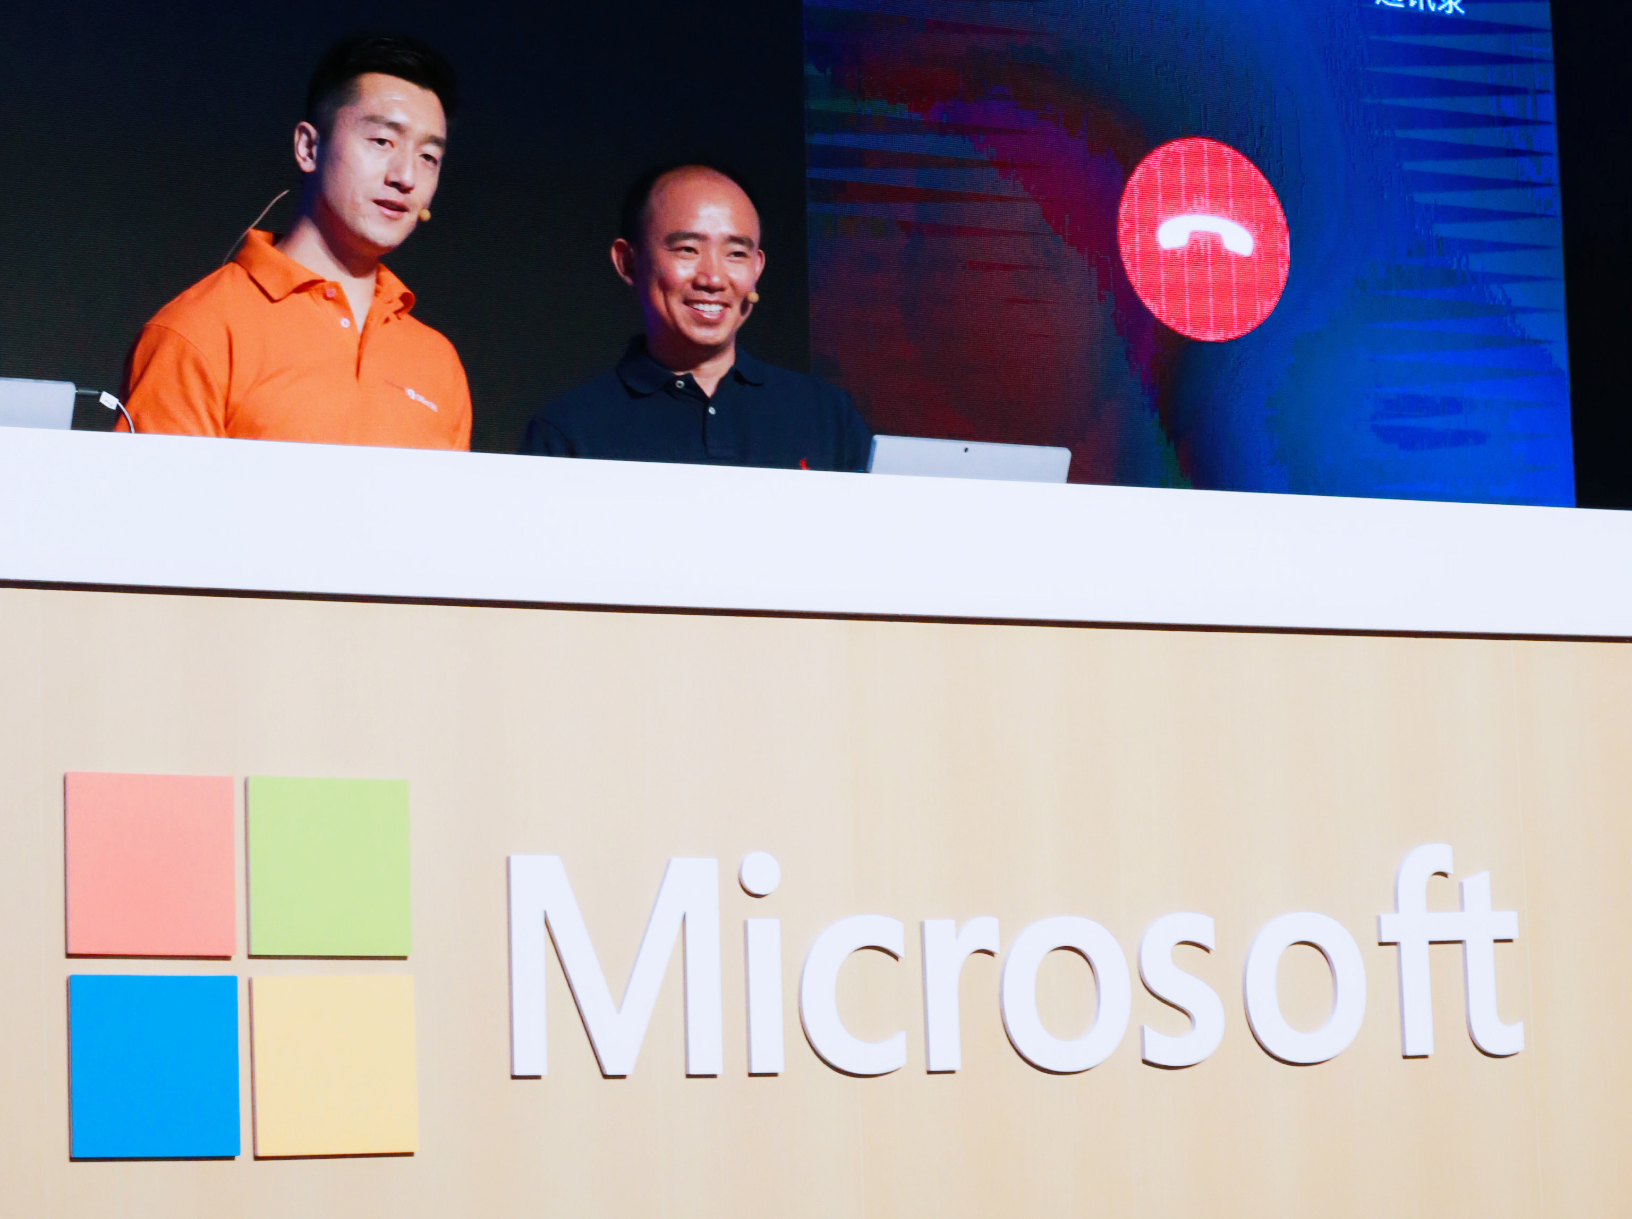 Han Wang, Microsoft senior partner business manager, left, with Derek Du, vice president of Didi Chuxing and general manager of Didi Enterprise, at a Microsoft developer summit on June 1, 2016 in China.